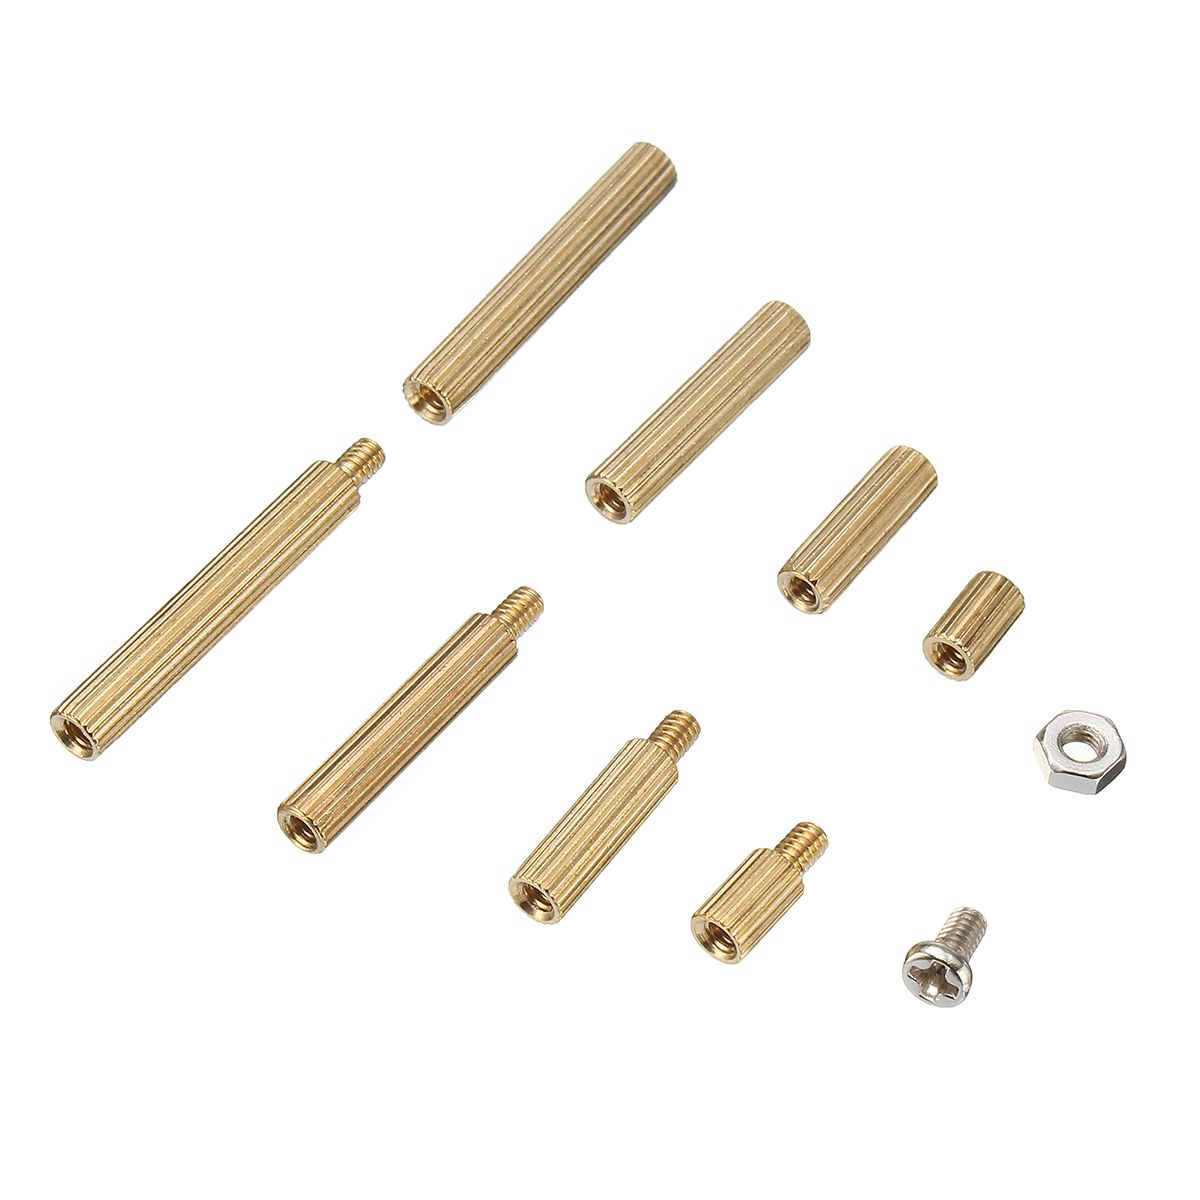 Qty 10 Brass Stand-off Pillars Spacers M2x5x8mm Male to Female UK Seller 